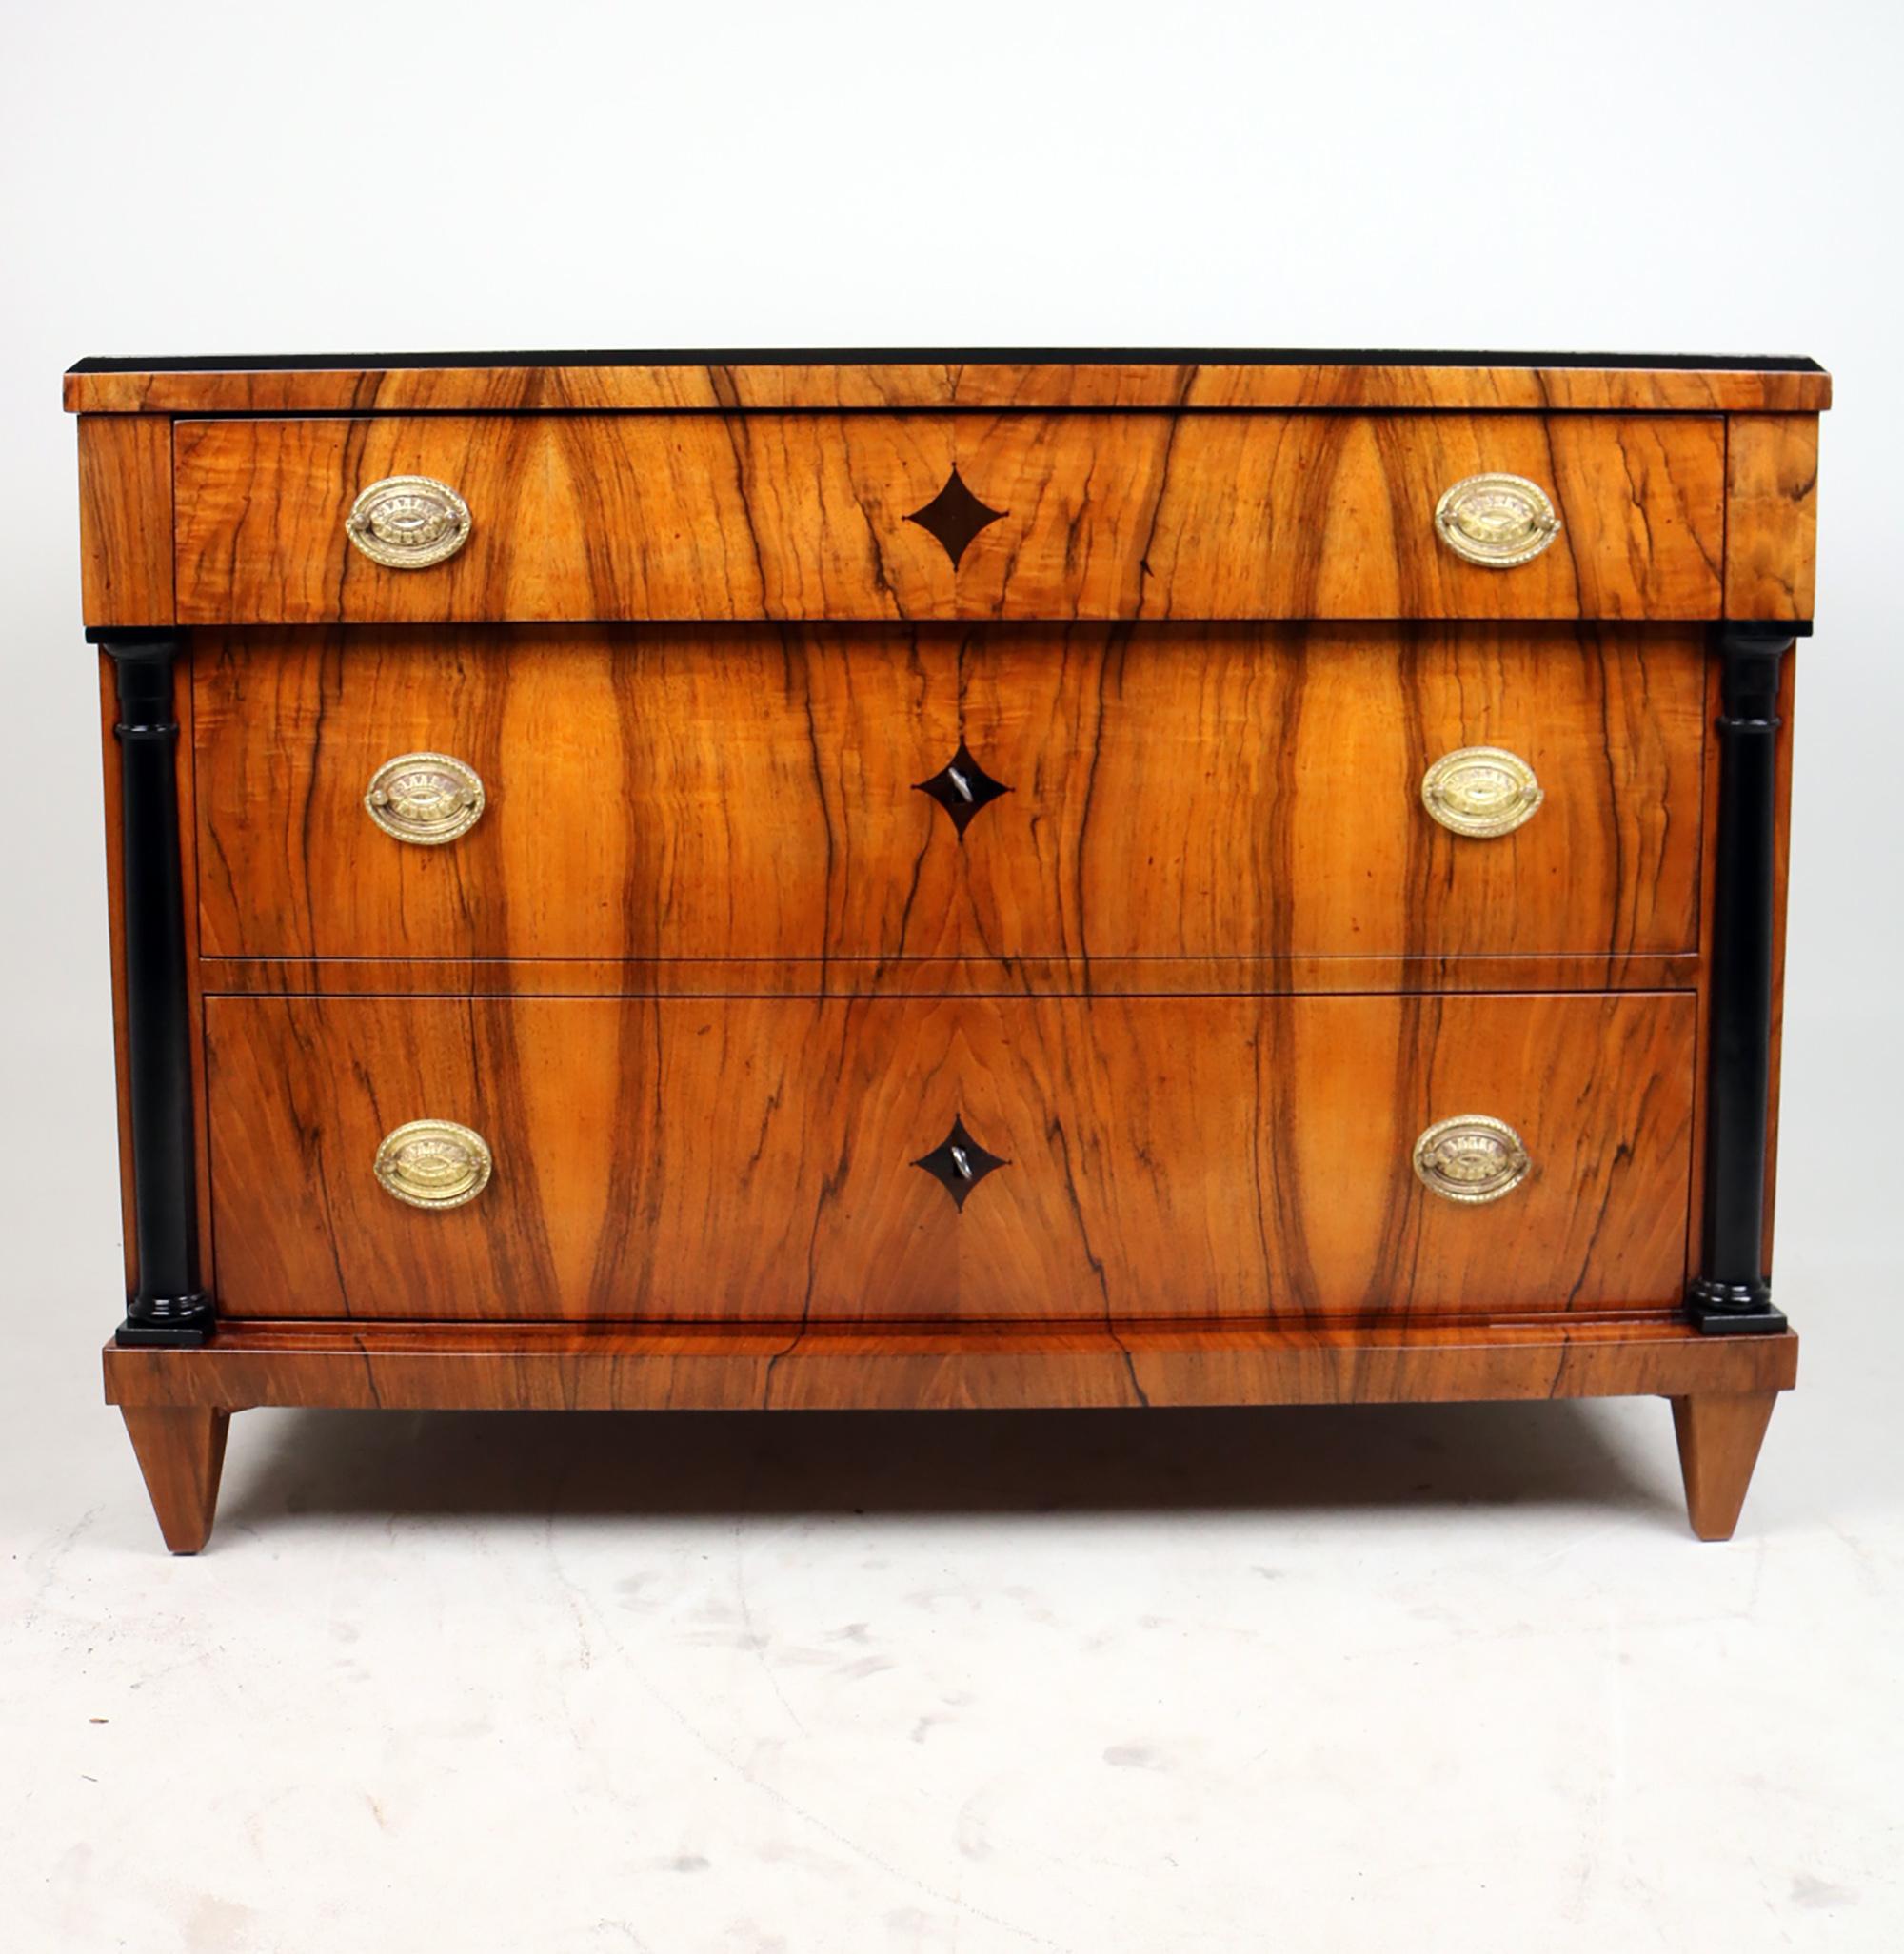 Early 19th Century Early Biedermeier Chest of Drawers